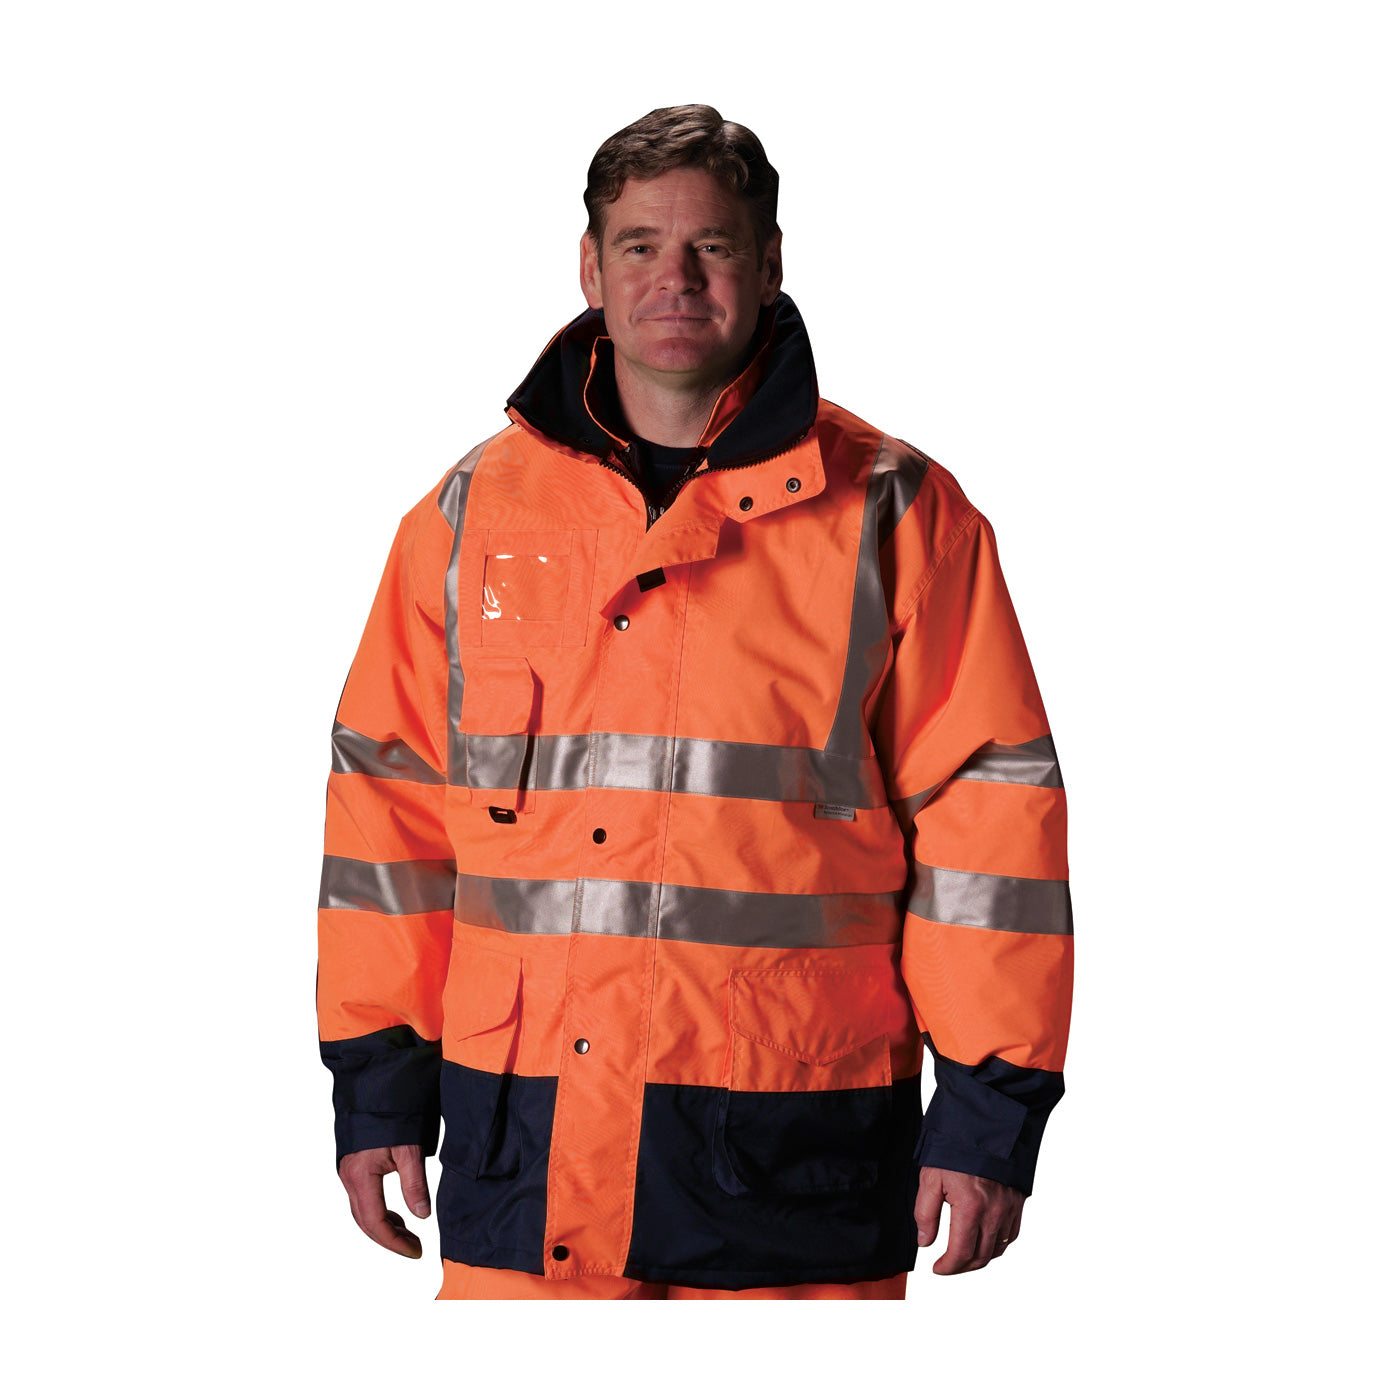 PIP 343-1756-OR/5X ANSI Type R Class 3 7-in-1 All Conditions Coat with Inner Jacket and Vest Combination